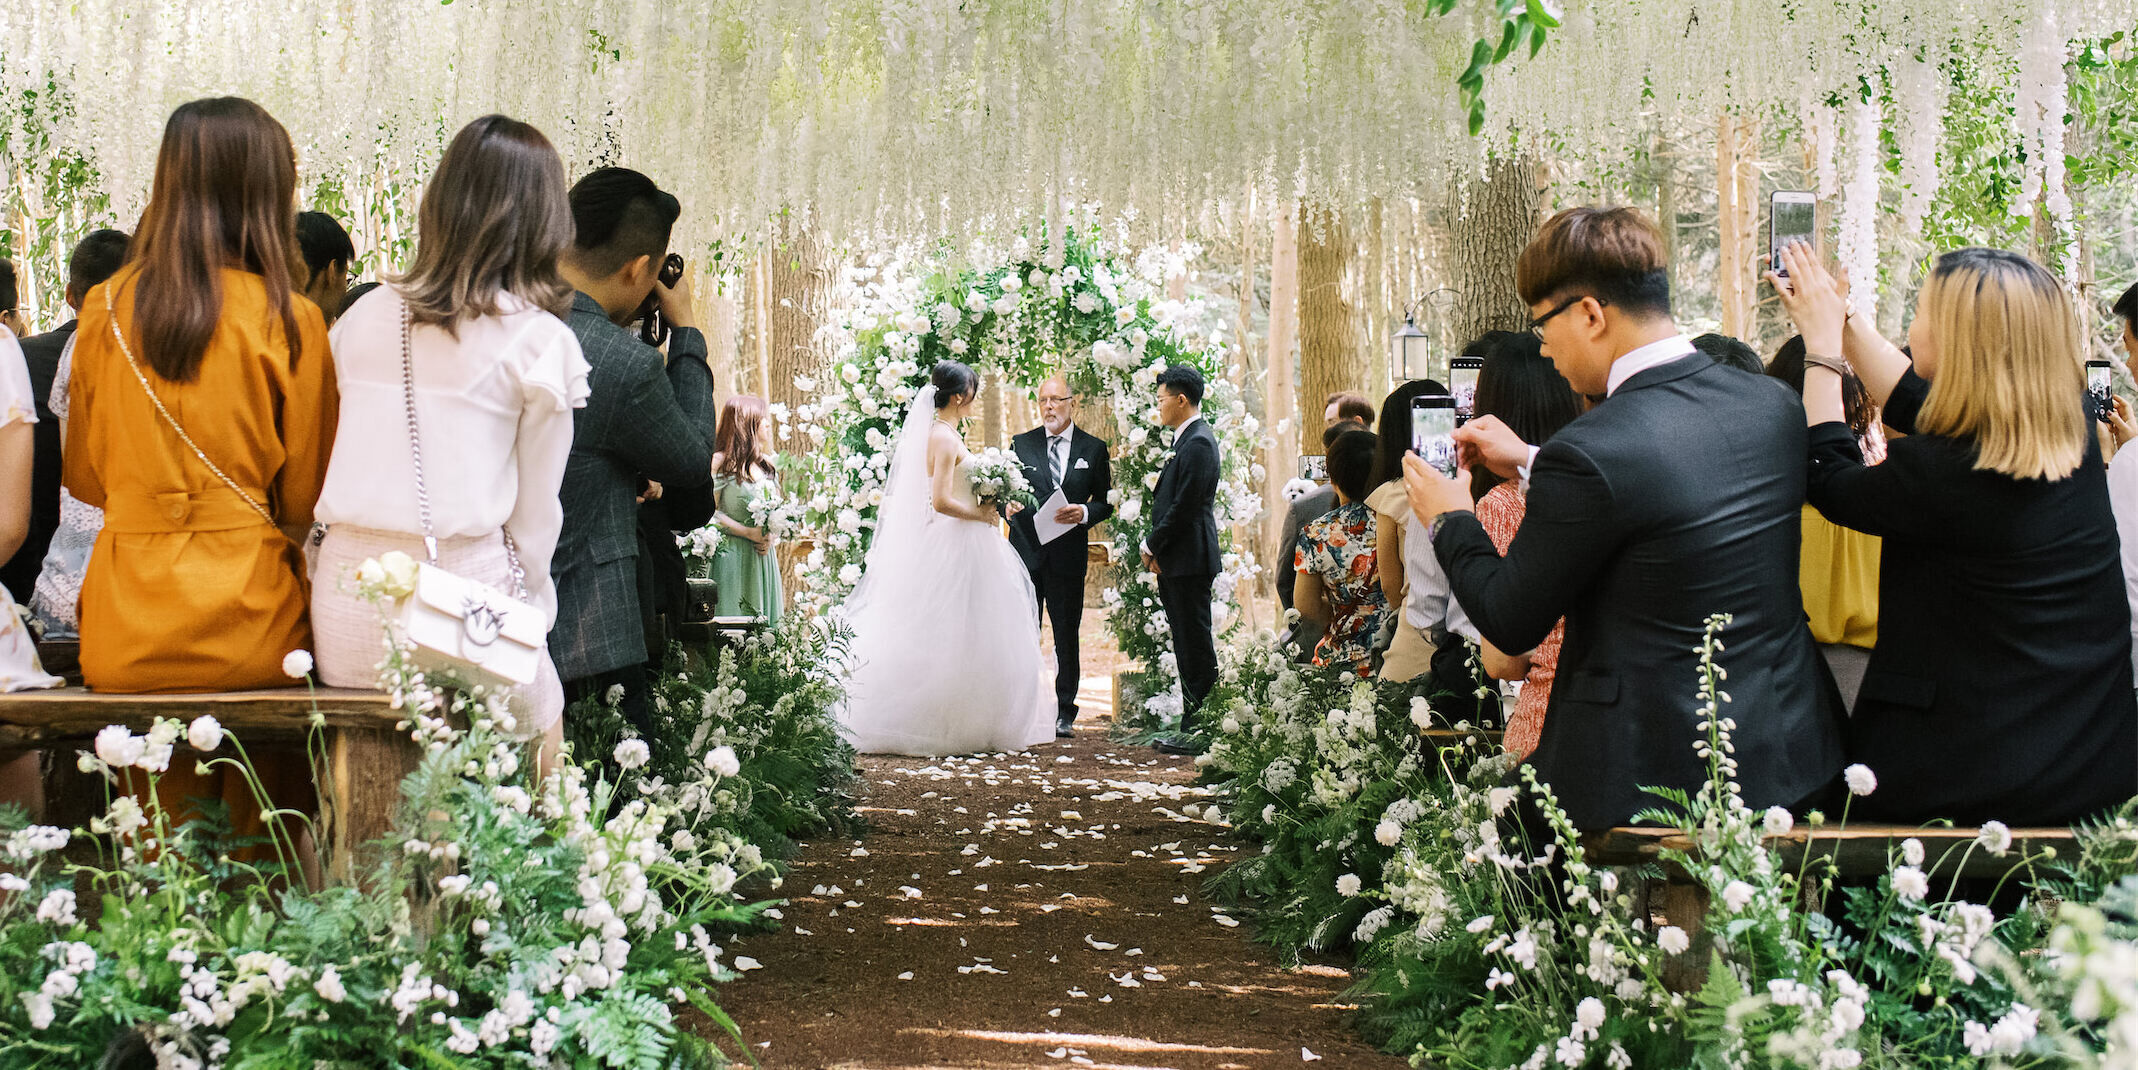 A bride and groom marry in a floral-filled forest wedding ceremony inspired by the movie Twilight's wedding scene.